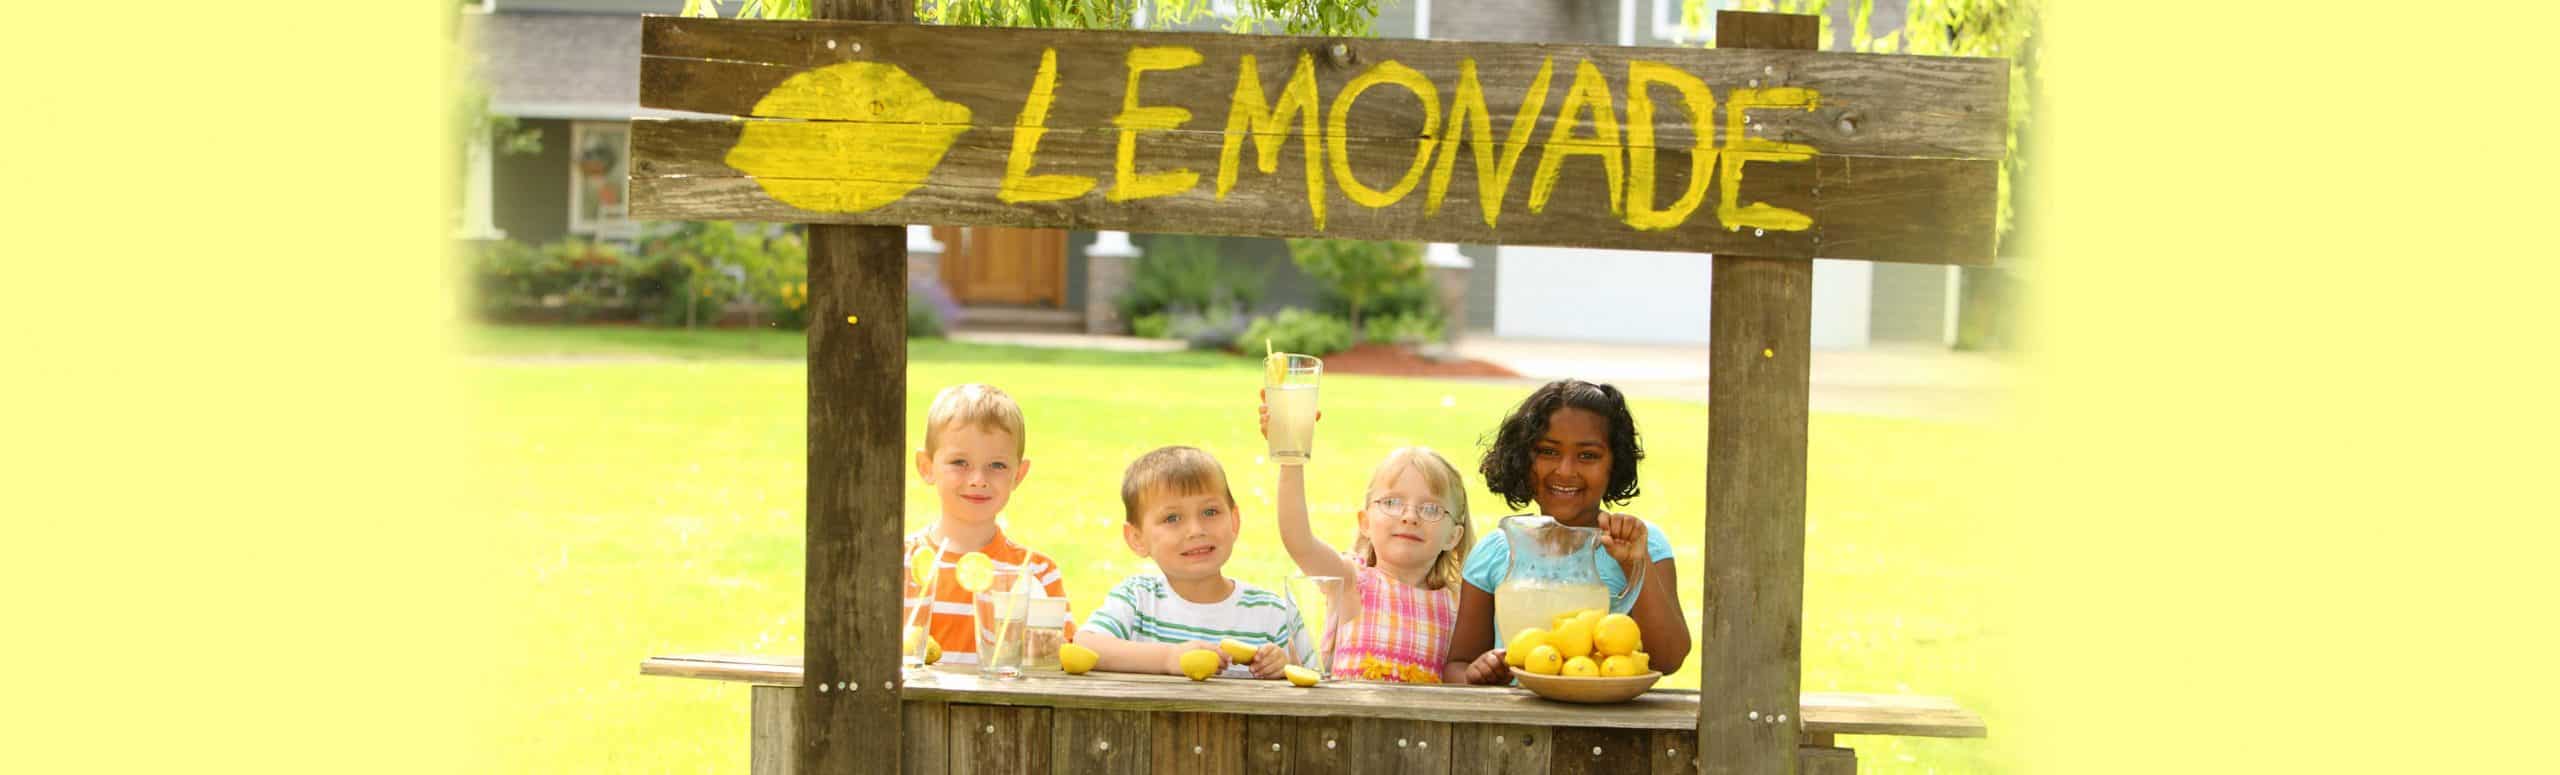 4 children behind a wooden lemonade stand with a sign that reads "LEMONADE"